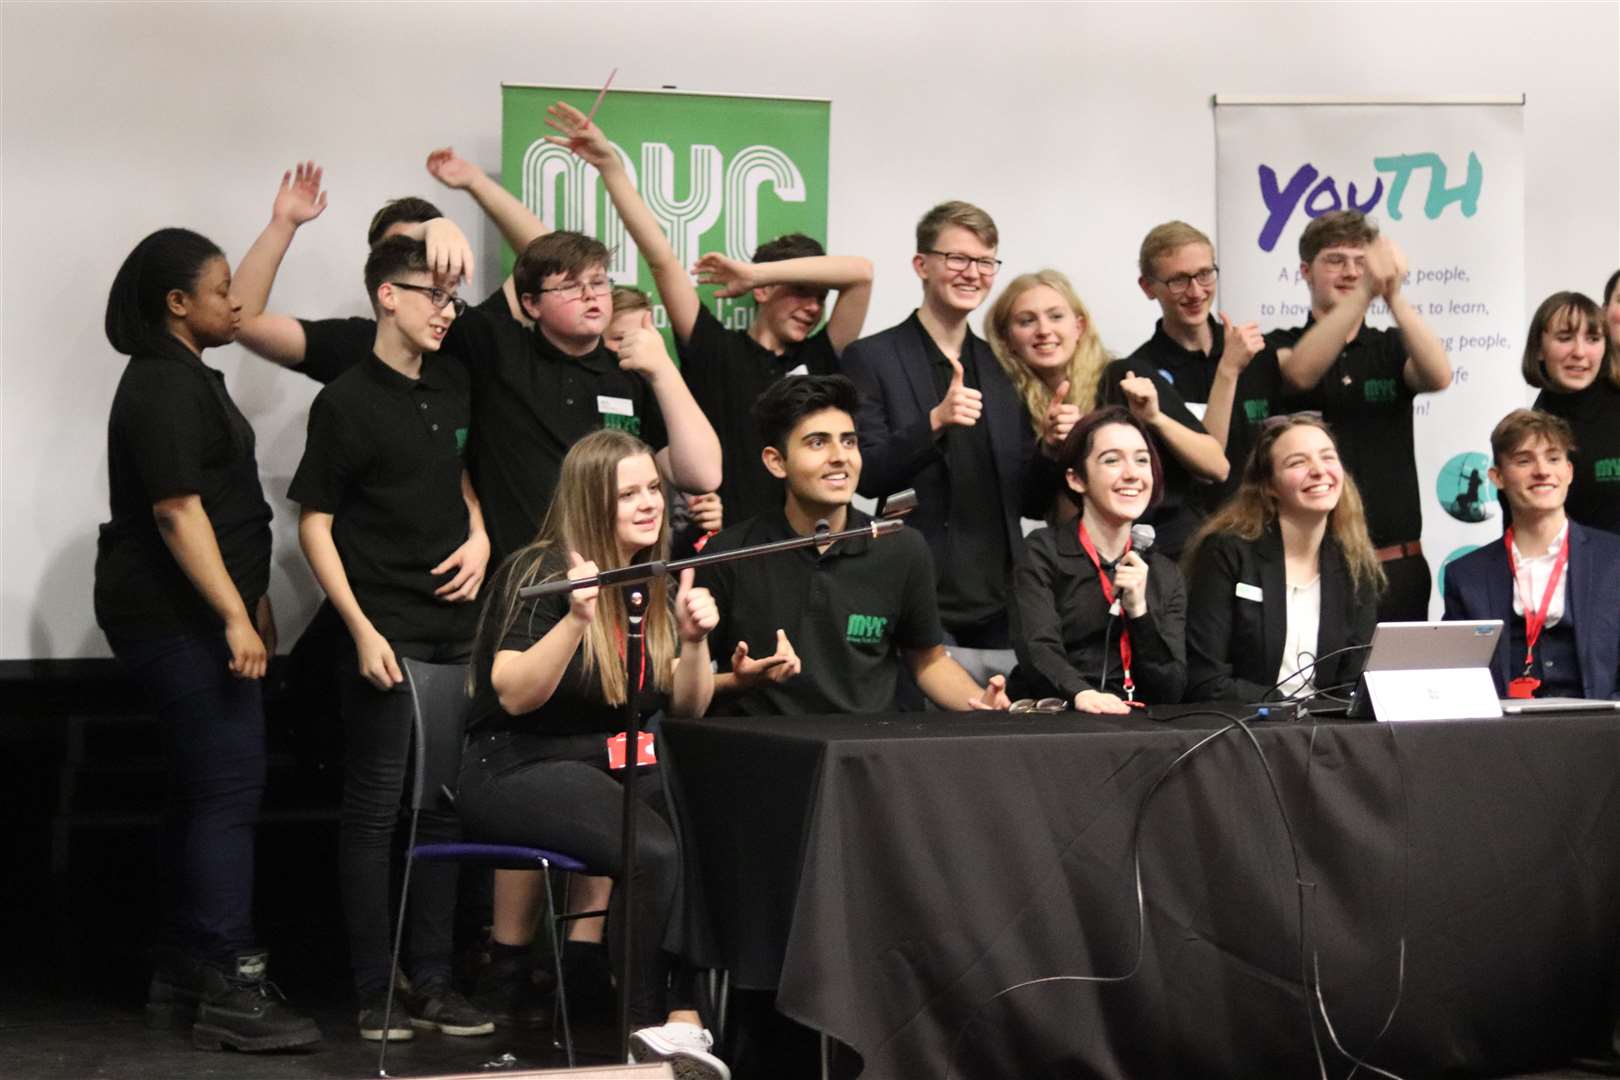 The Medway Youth Council at its most recent annual conference on climate change